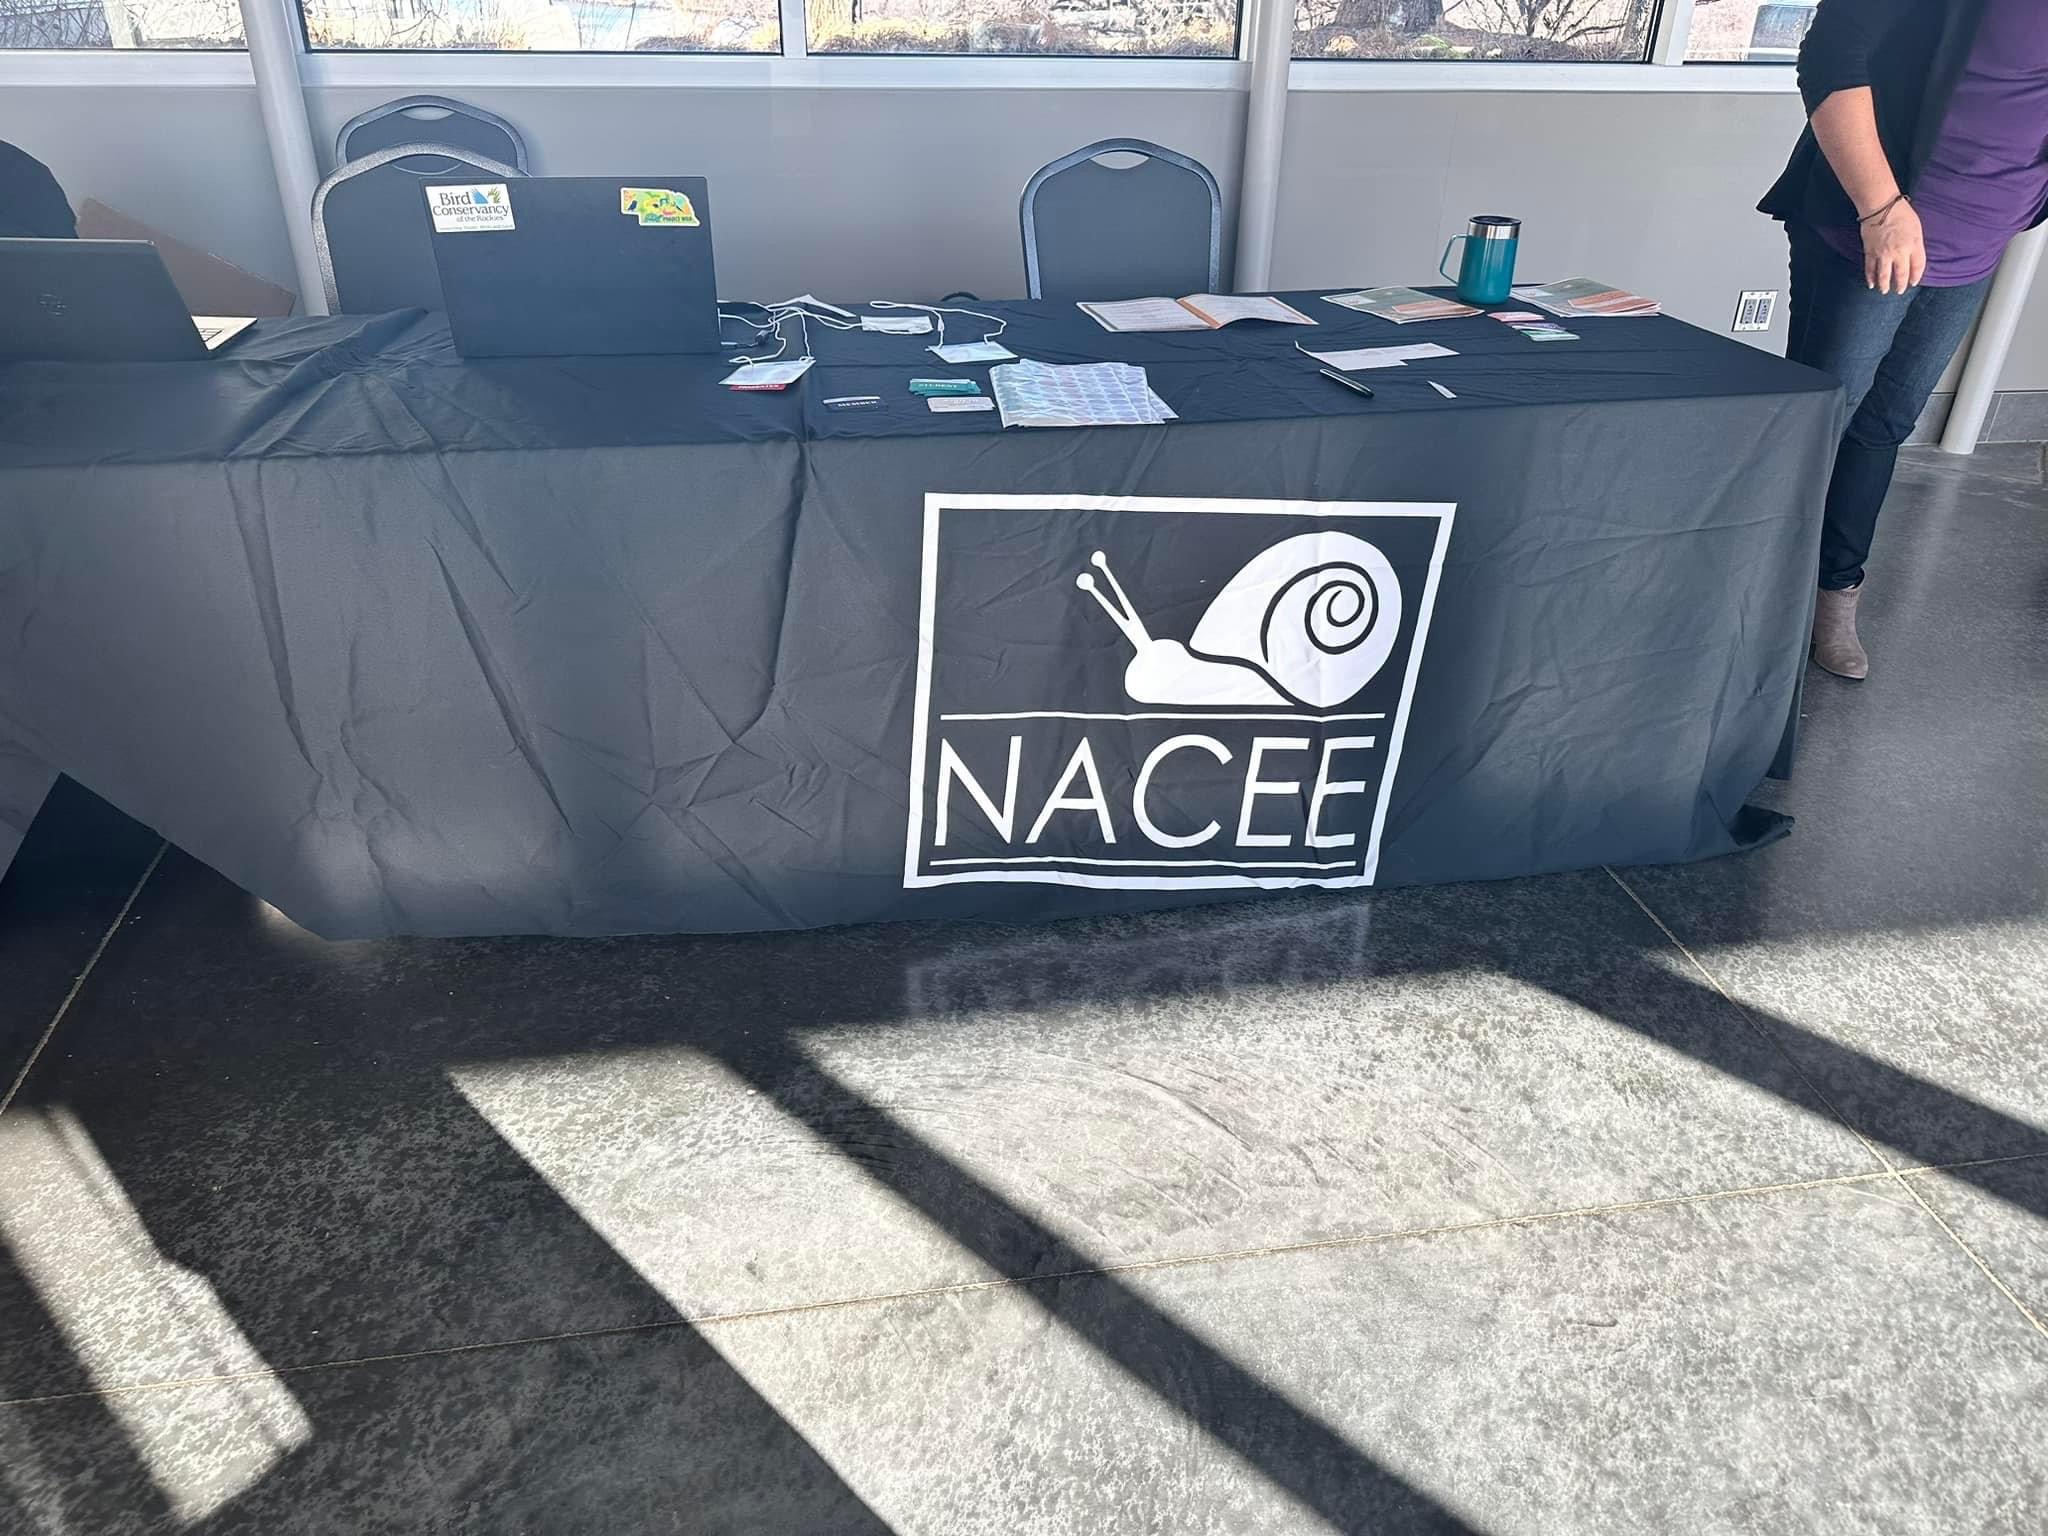 a table with a cover of a company called "NACEE" which features a drawing of a snail on top of the words - jacqelle lane